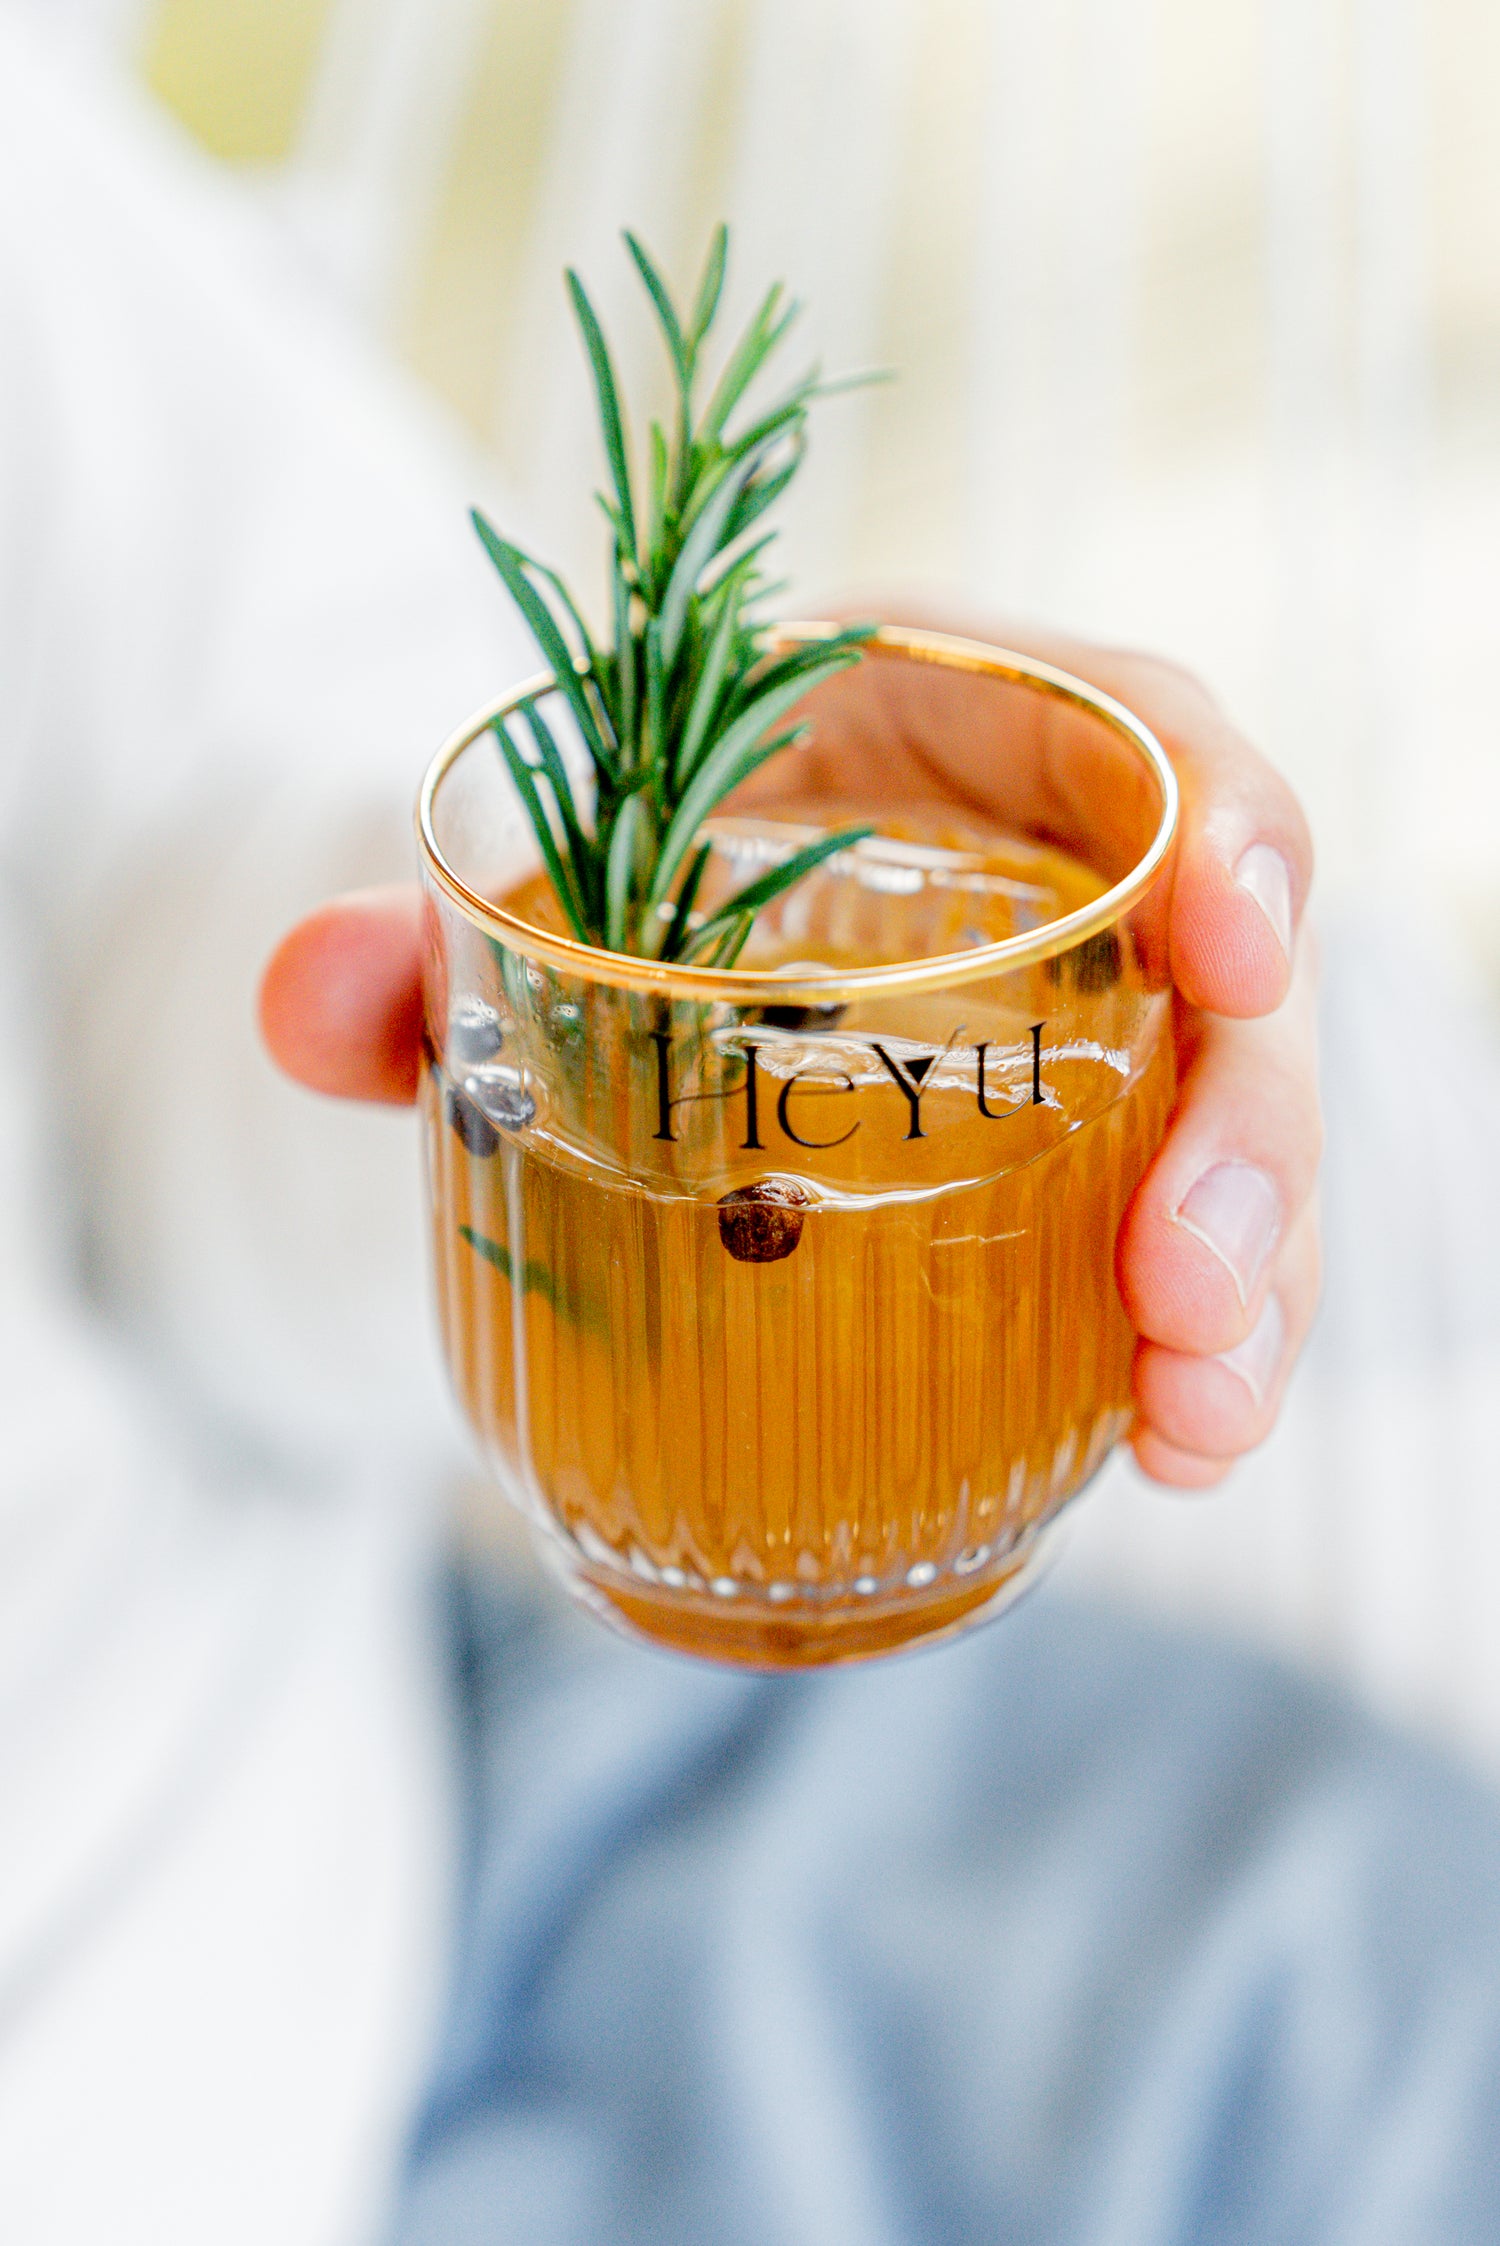 Picture of a hand holding a Heyu Spicy Peach Vanilla mocktail with a sprig of rosemary